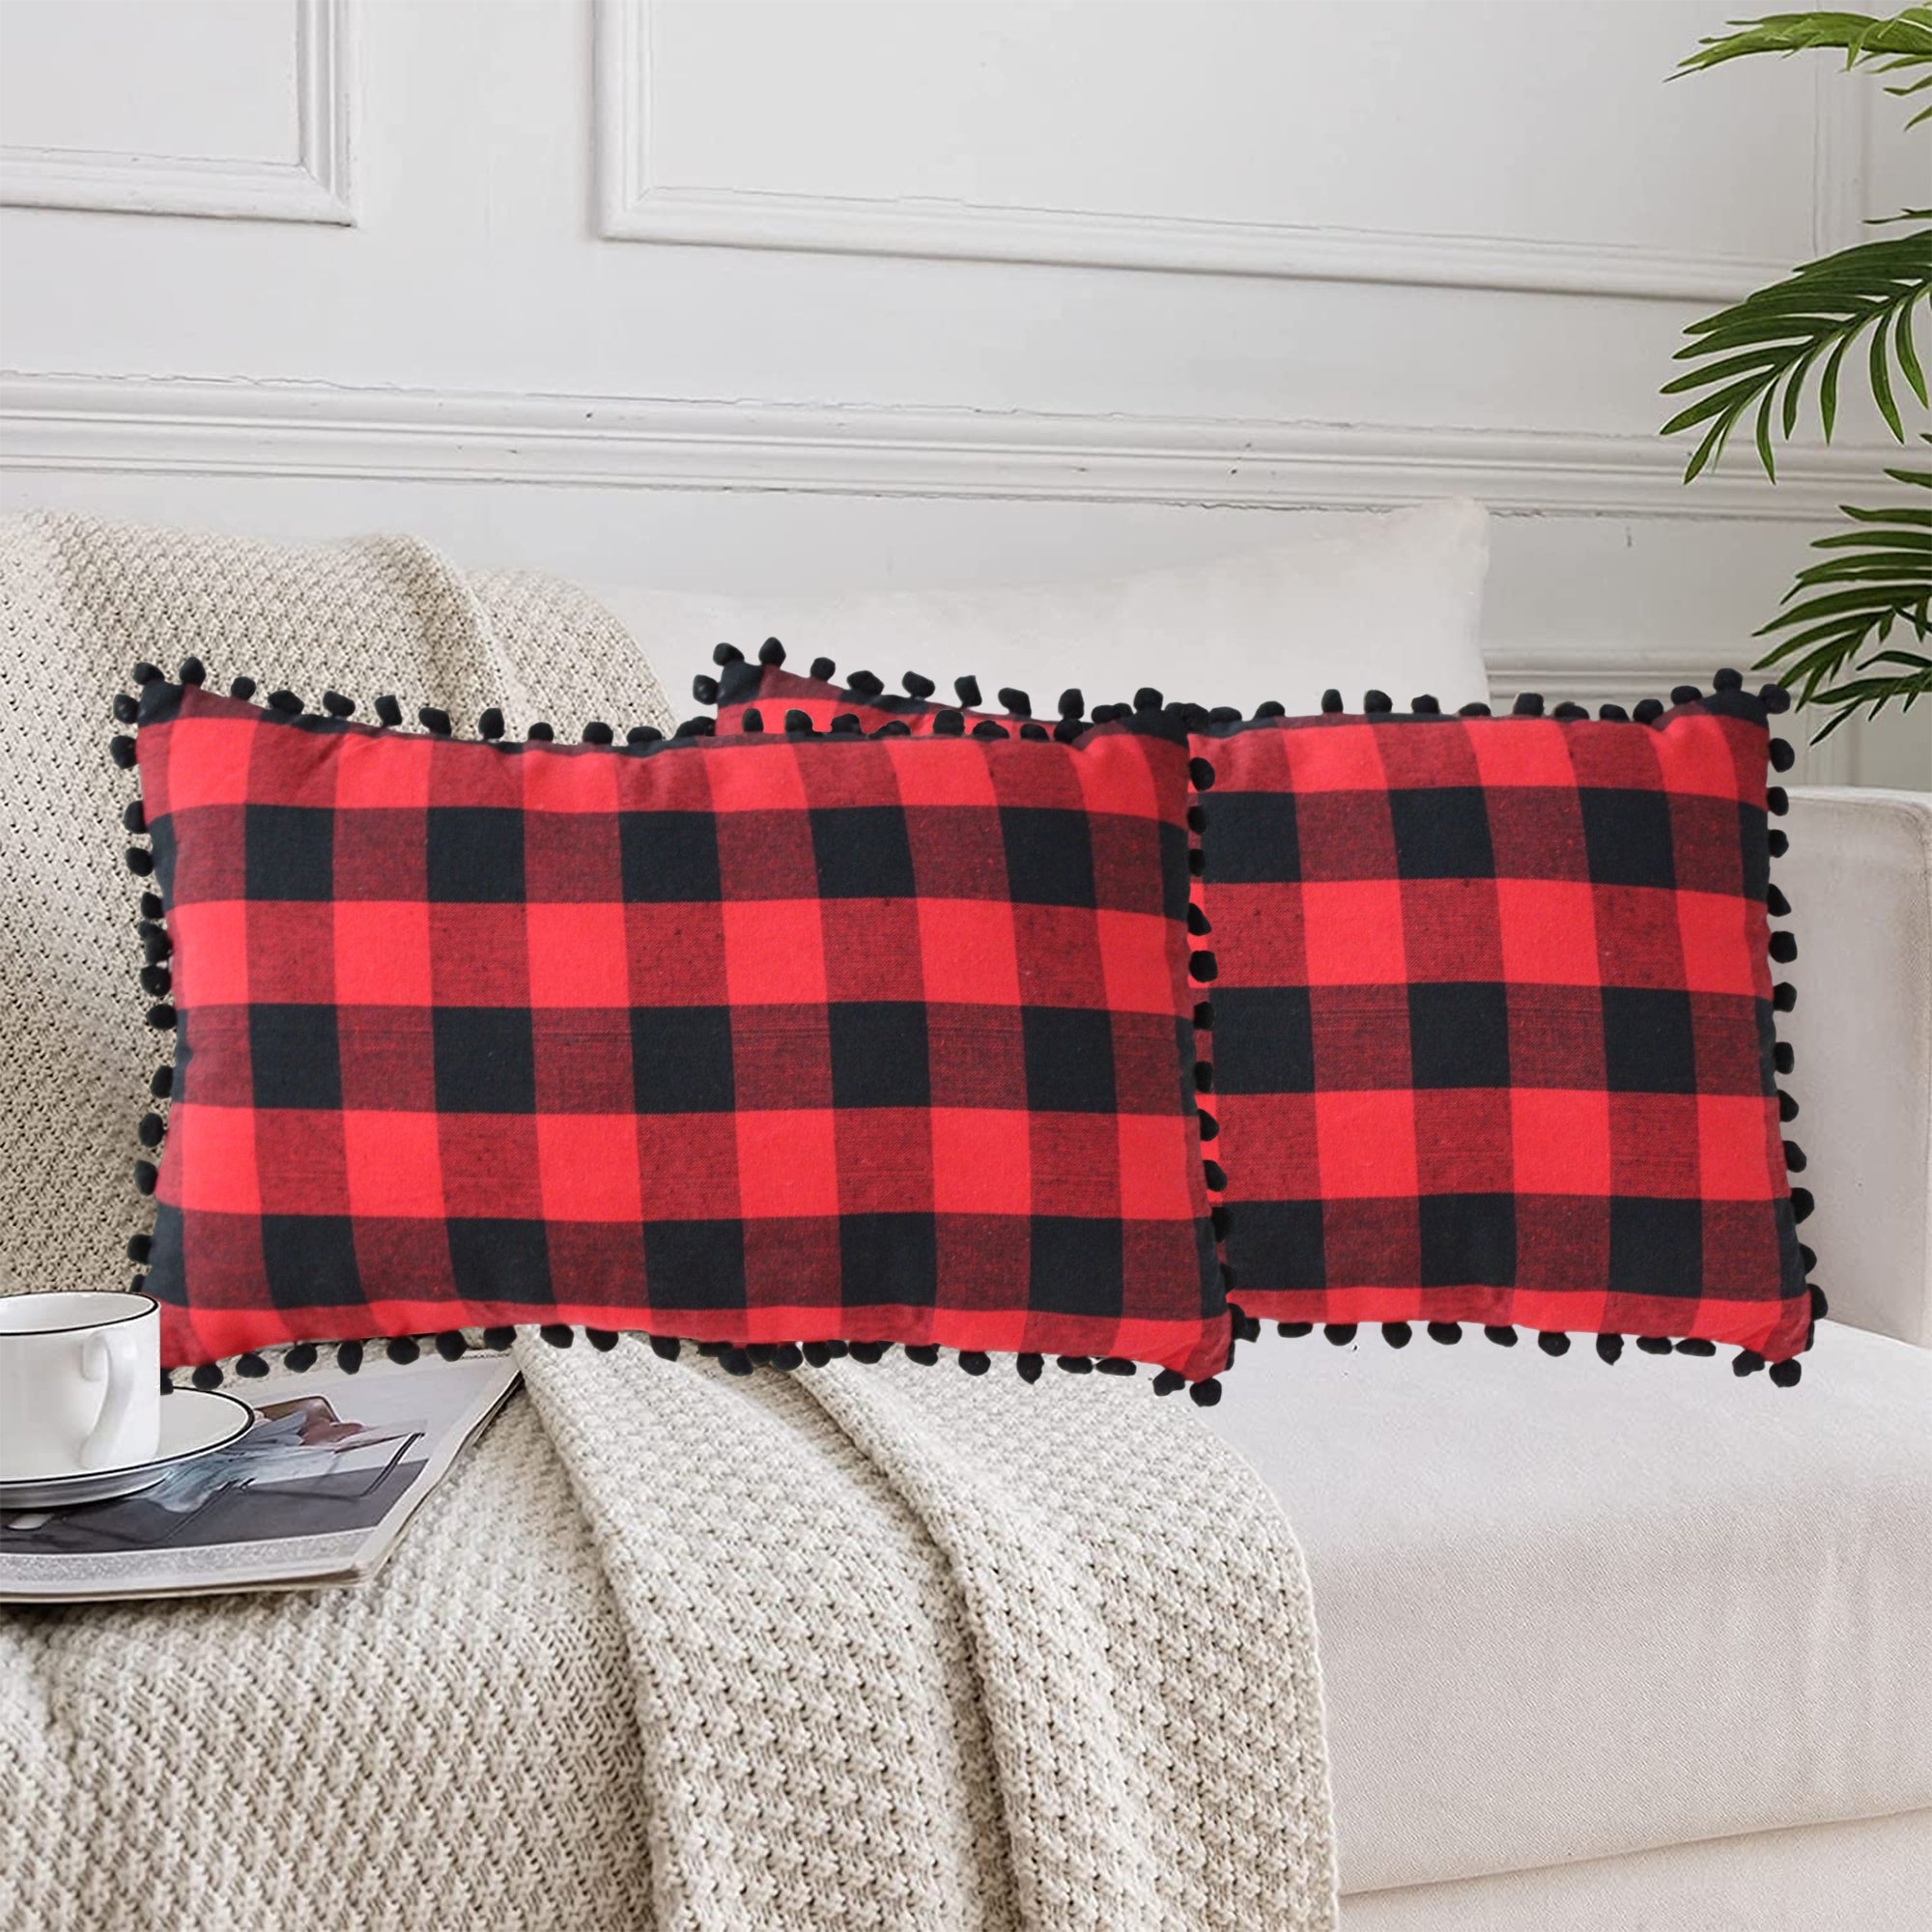 Lushomes Rectangle Cushion Cover with Pom Pom, Cotton Sofa Pillow Cover Set of 2, 12x20 Inch, Big Checks, Red and Black Checks, Pillow Cushions Covers (Pack of 2, 30x50 Cms)